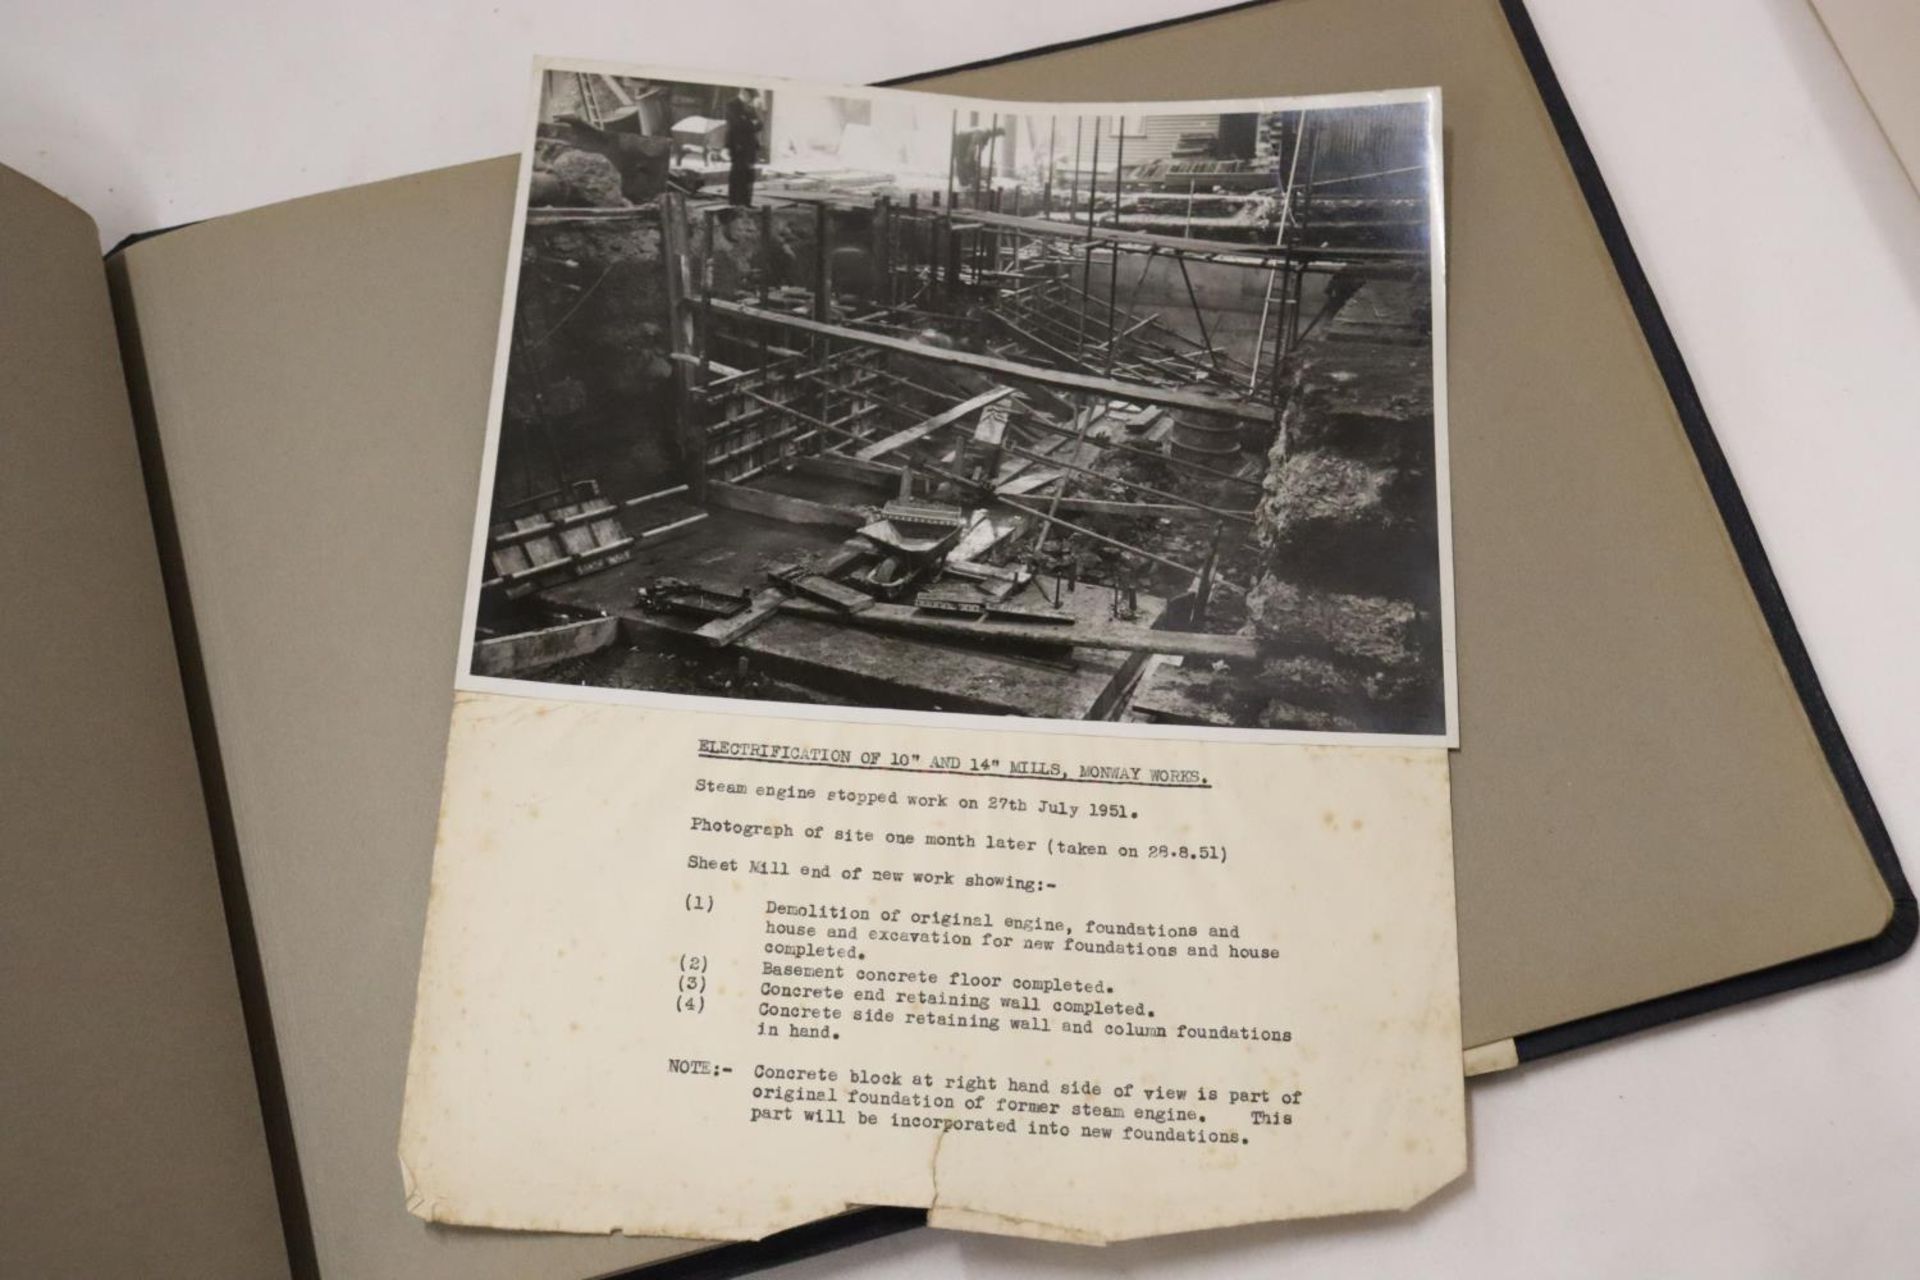 AN INDUSTRIAL PHOTO ALBUM FROM 1946 FULL OF POST WAR RENOVATIONS - Image 2 of 3